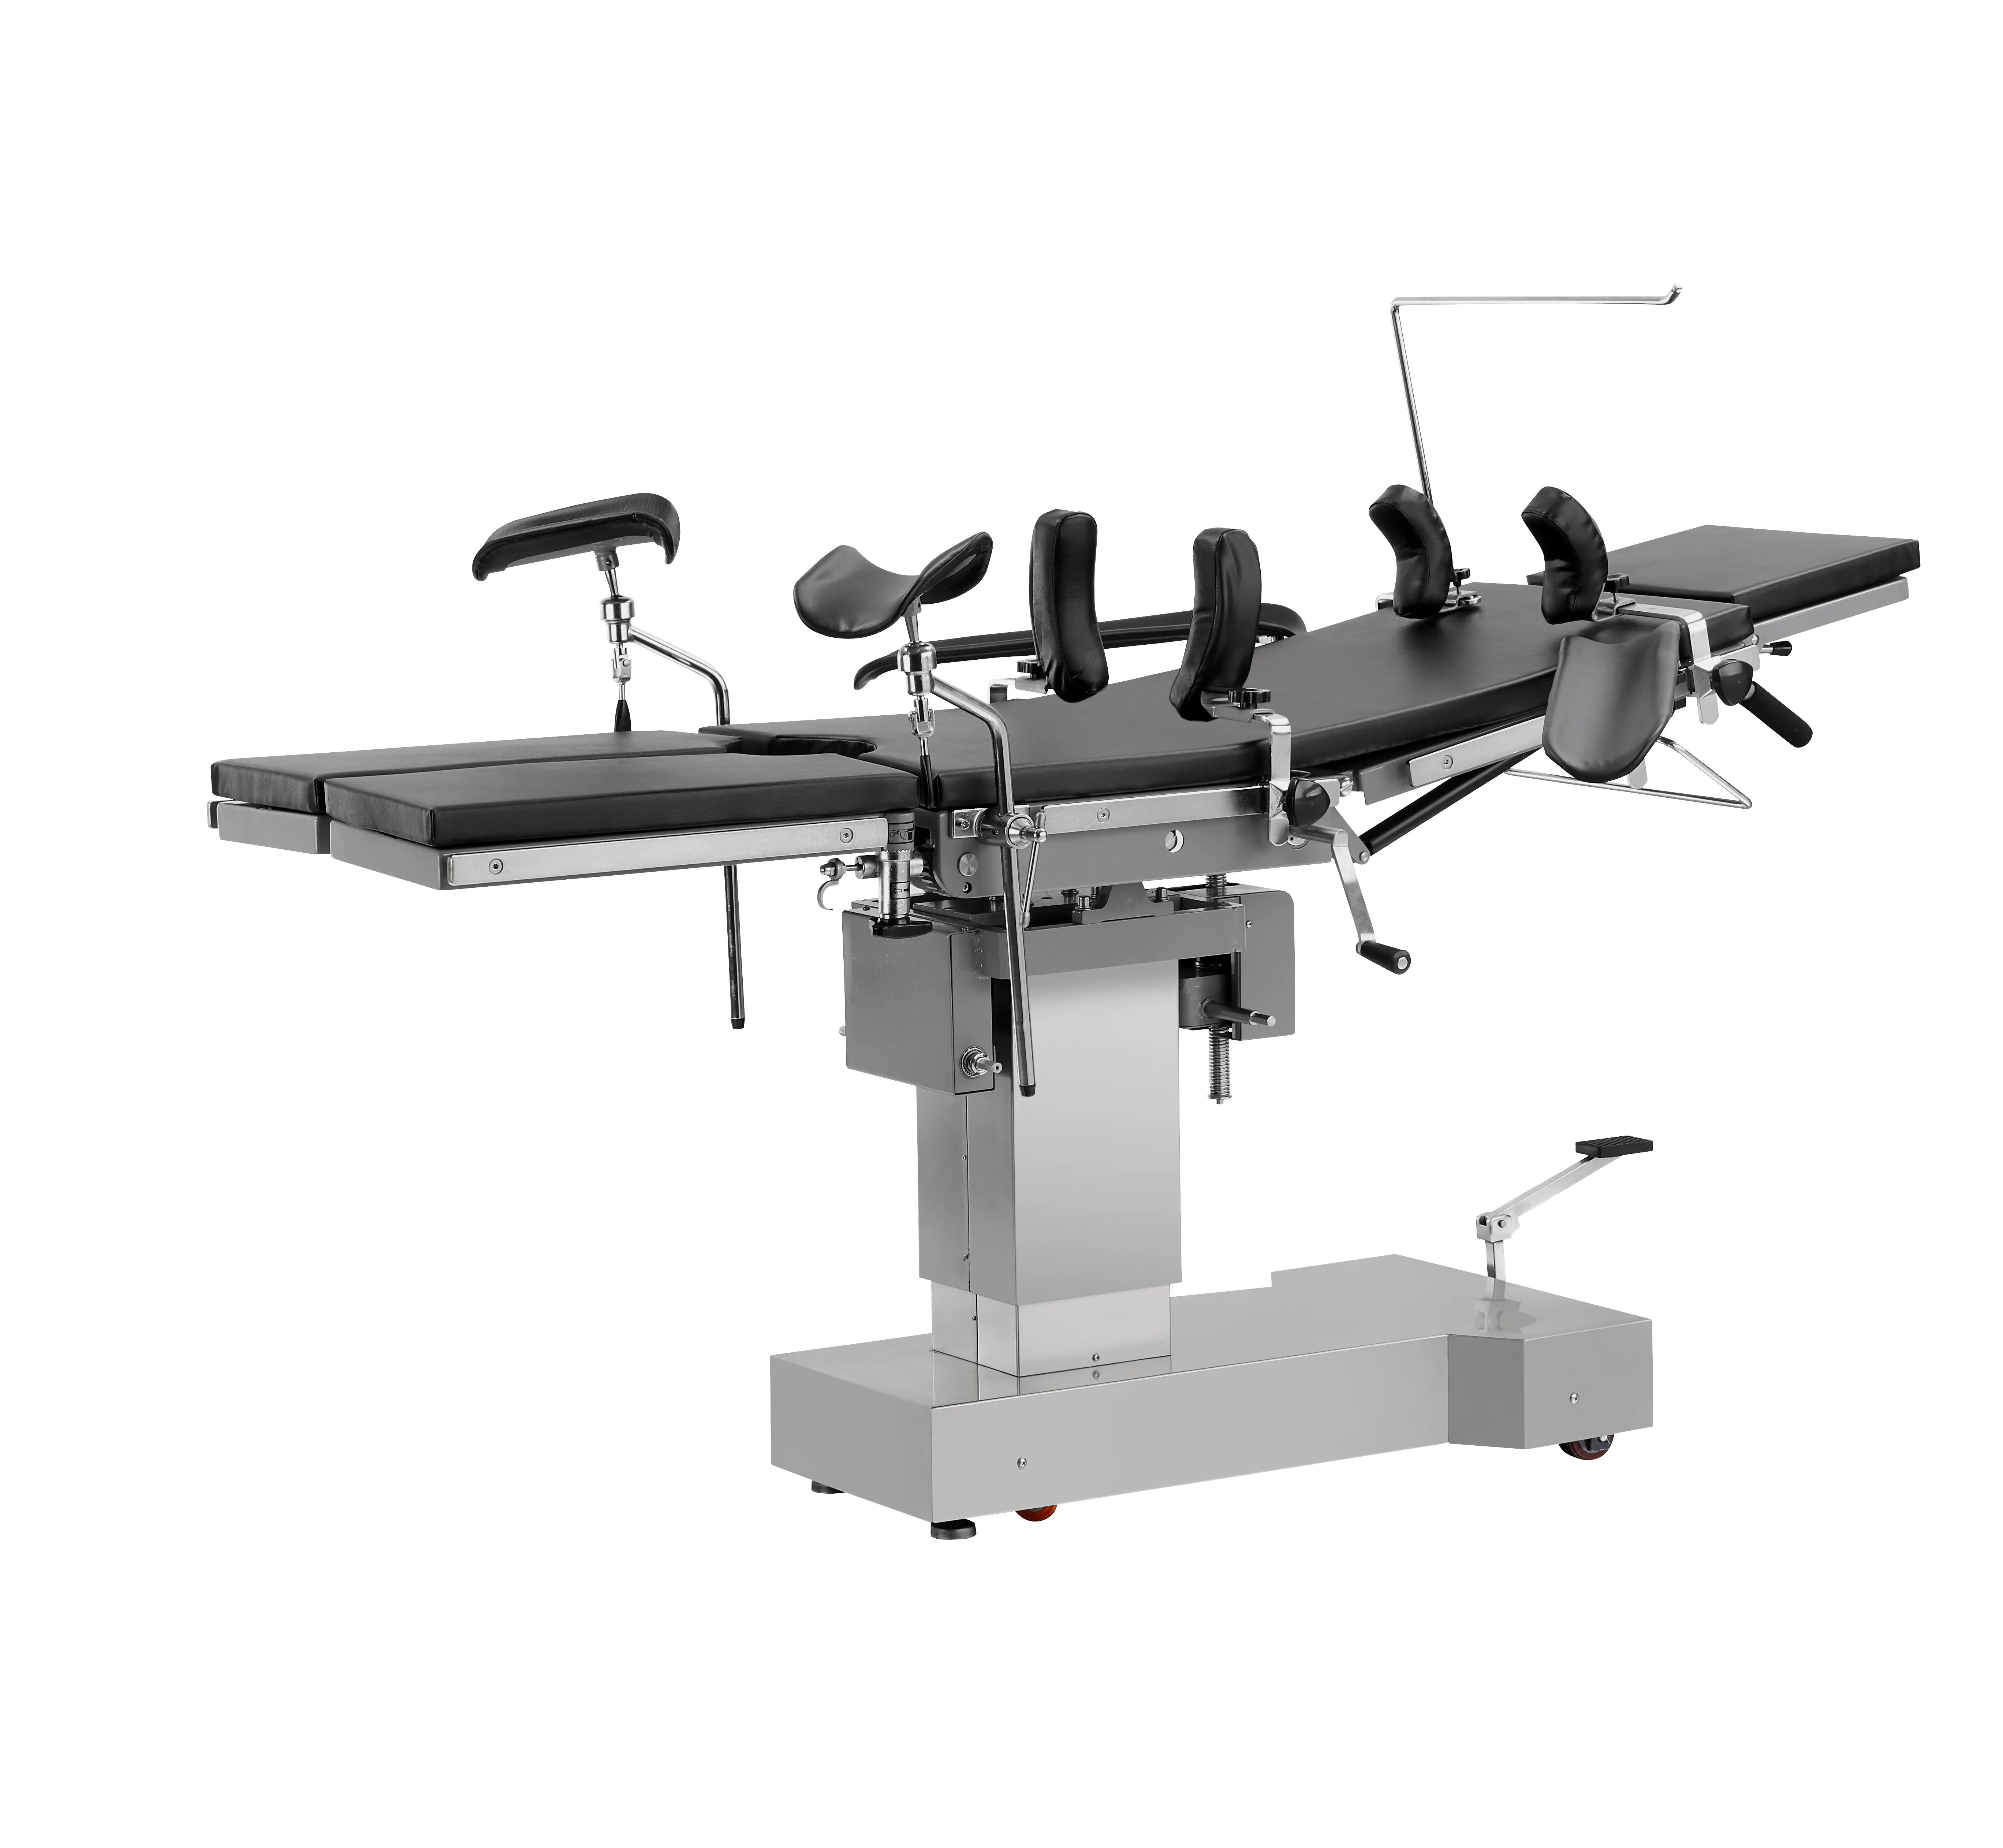 2100x490x 300-750 mm Mechanical Manual Surgical Bed Operation Table Hydraulic Operating Table